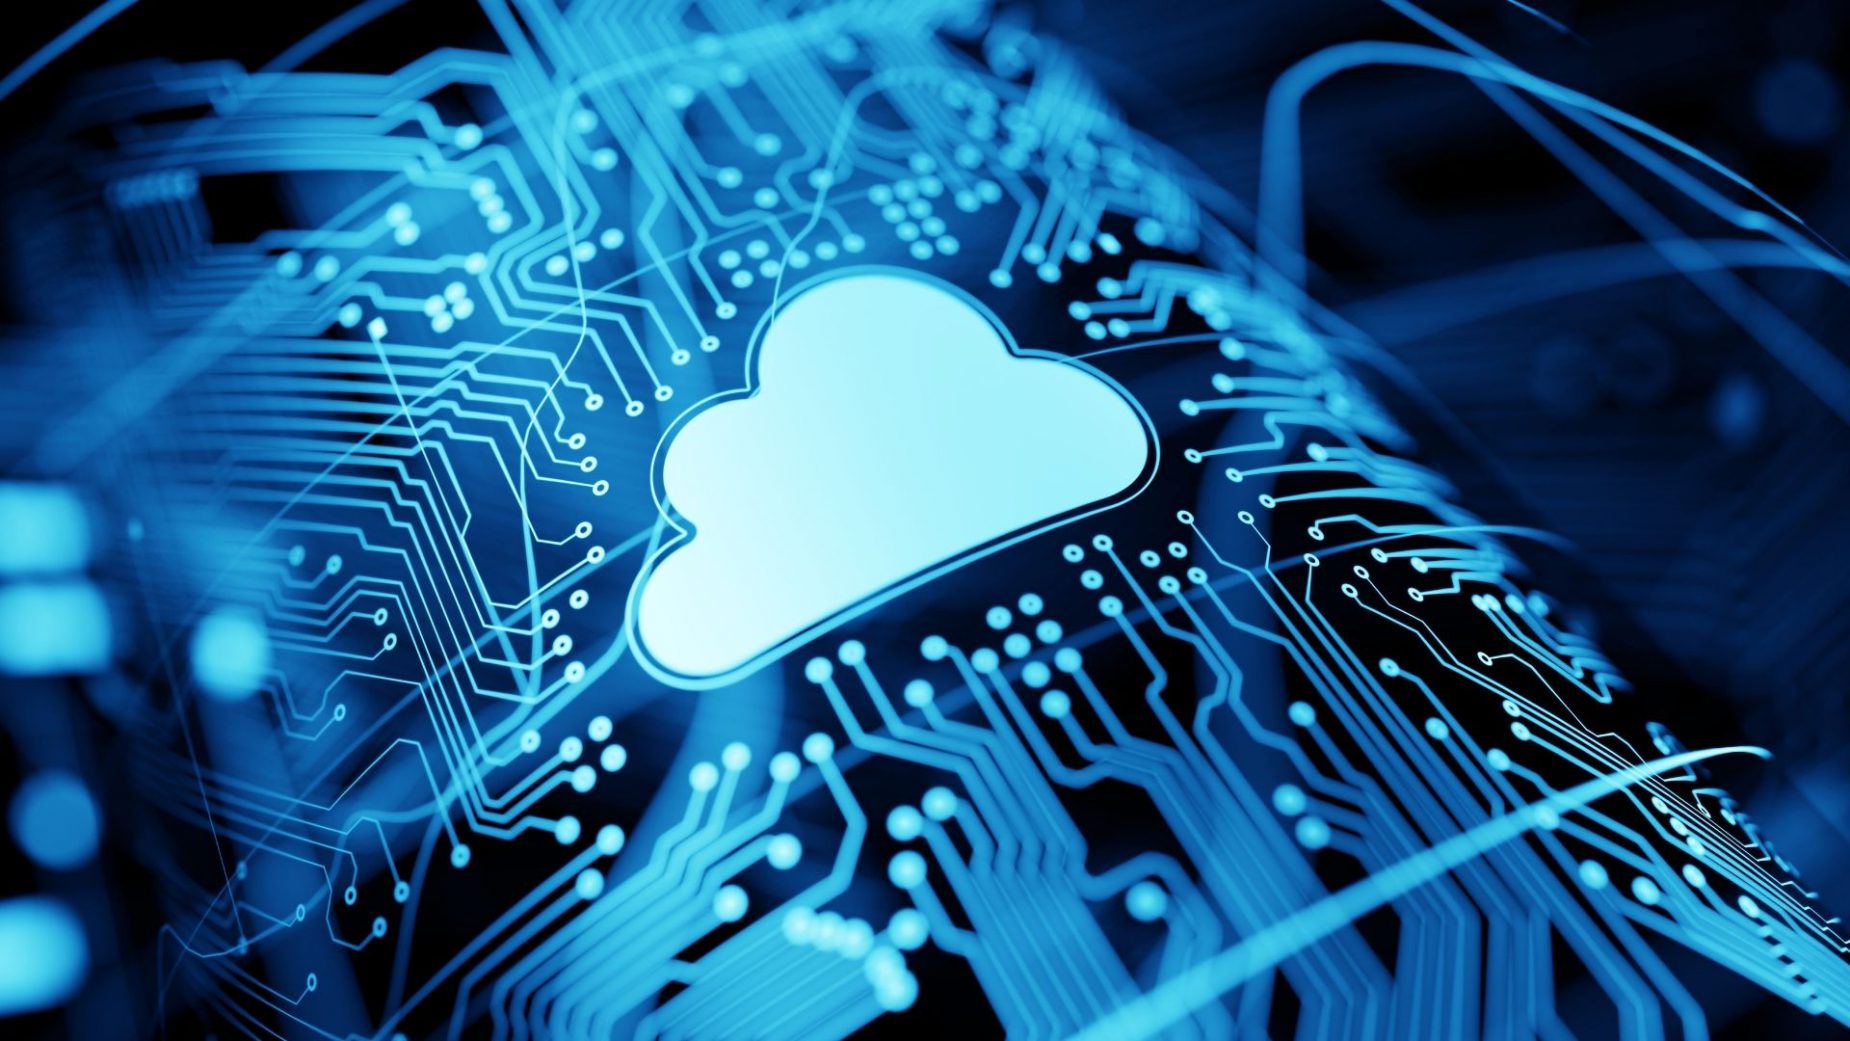 Global Cloud Services Market Overview And Prospects